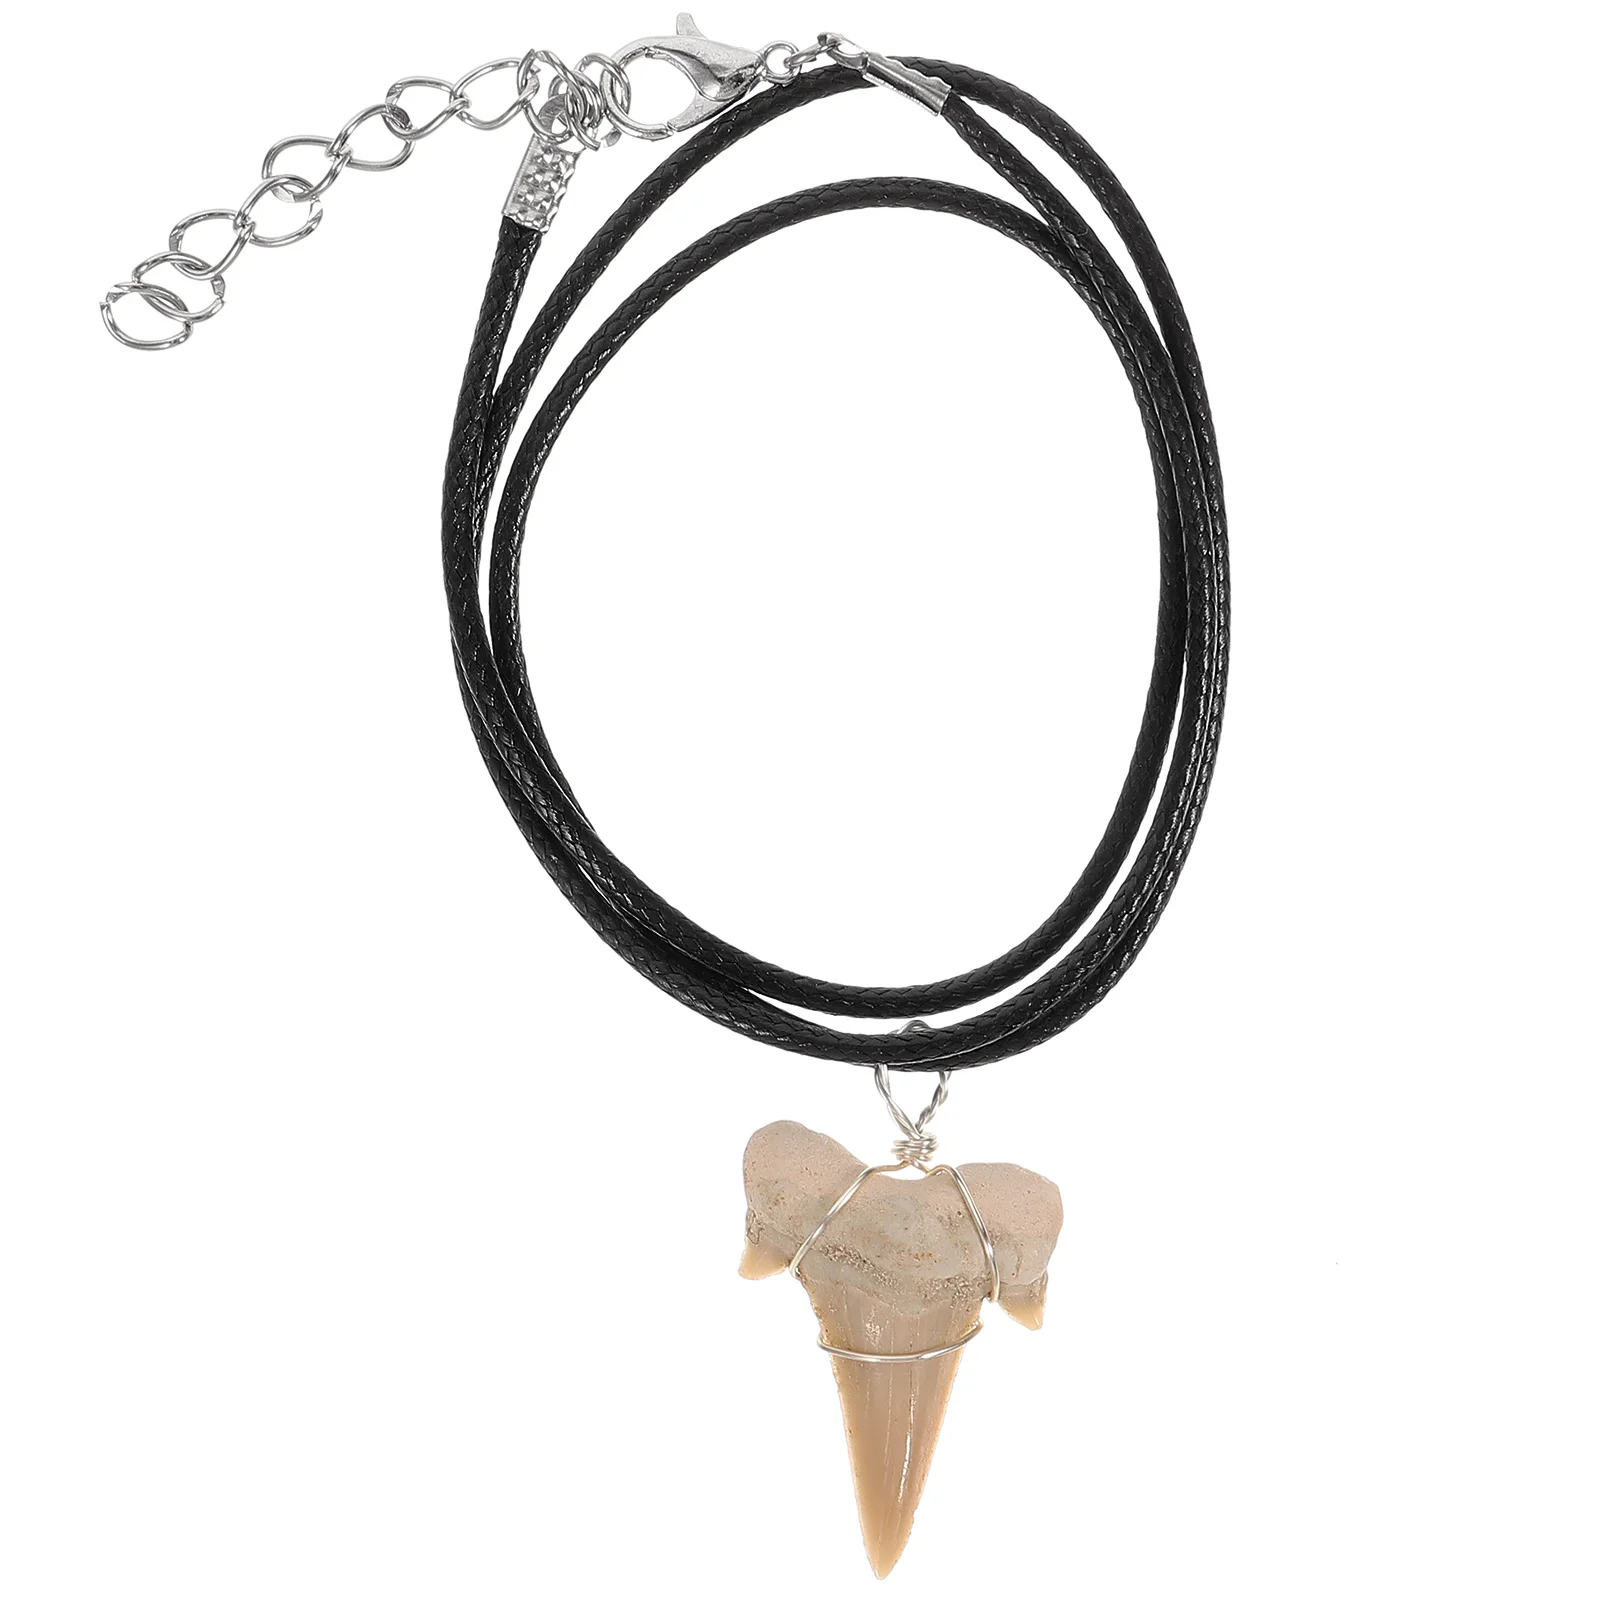 

Necklace for Women Necklaces Girls Sharks Tooth Chain Charm Cool Hanging Pendant Decoration Fossil Miss Cord